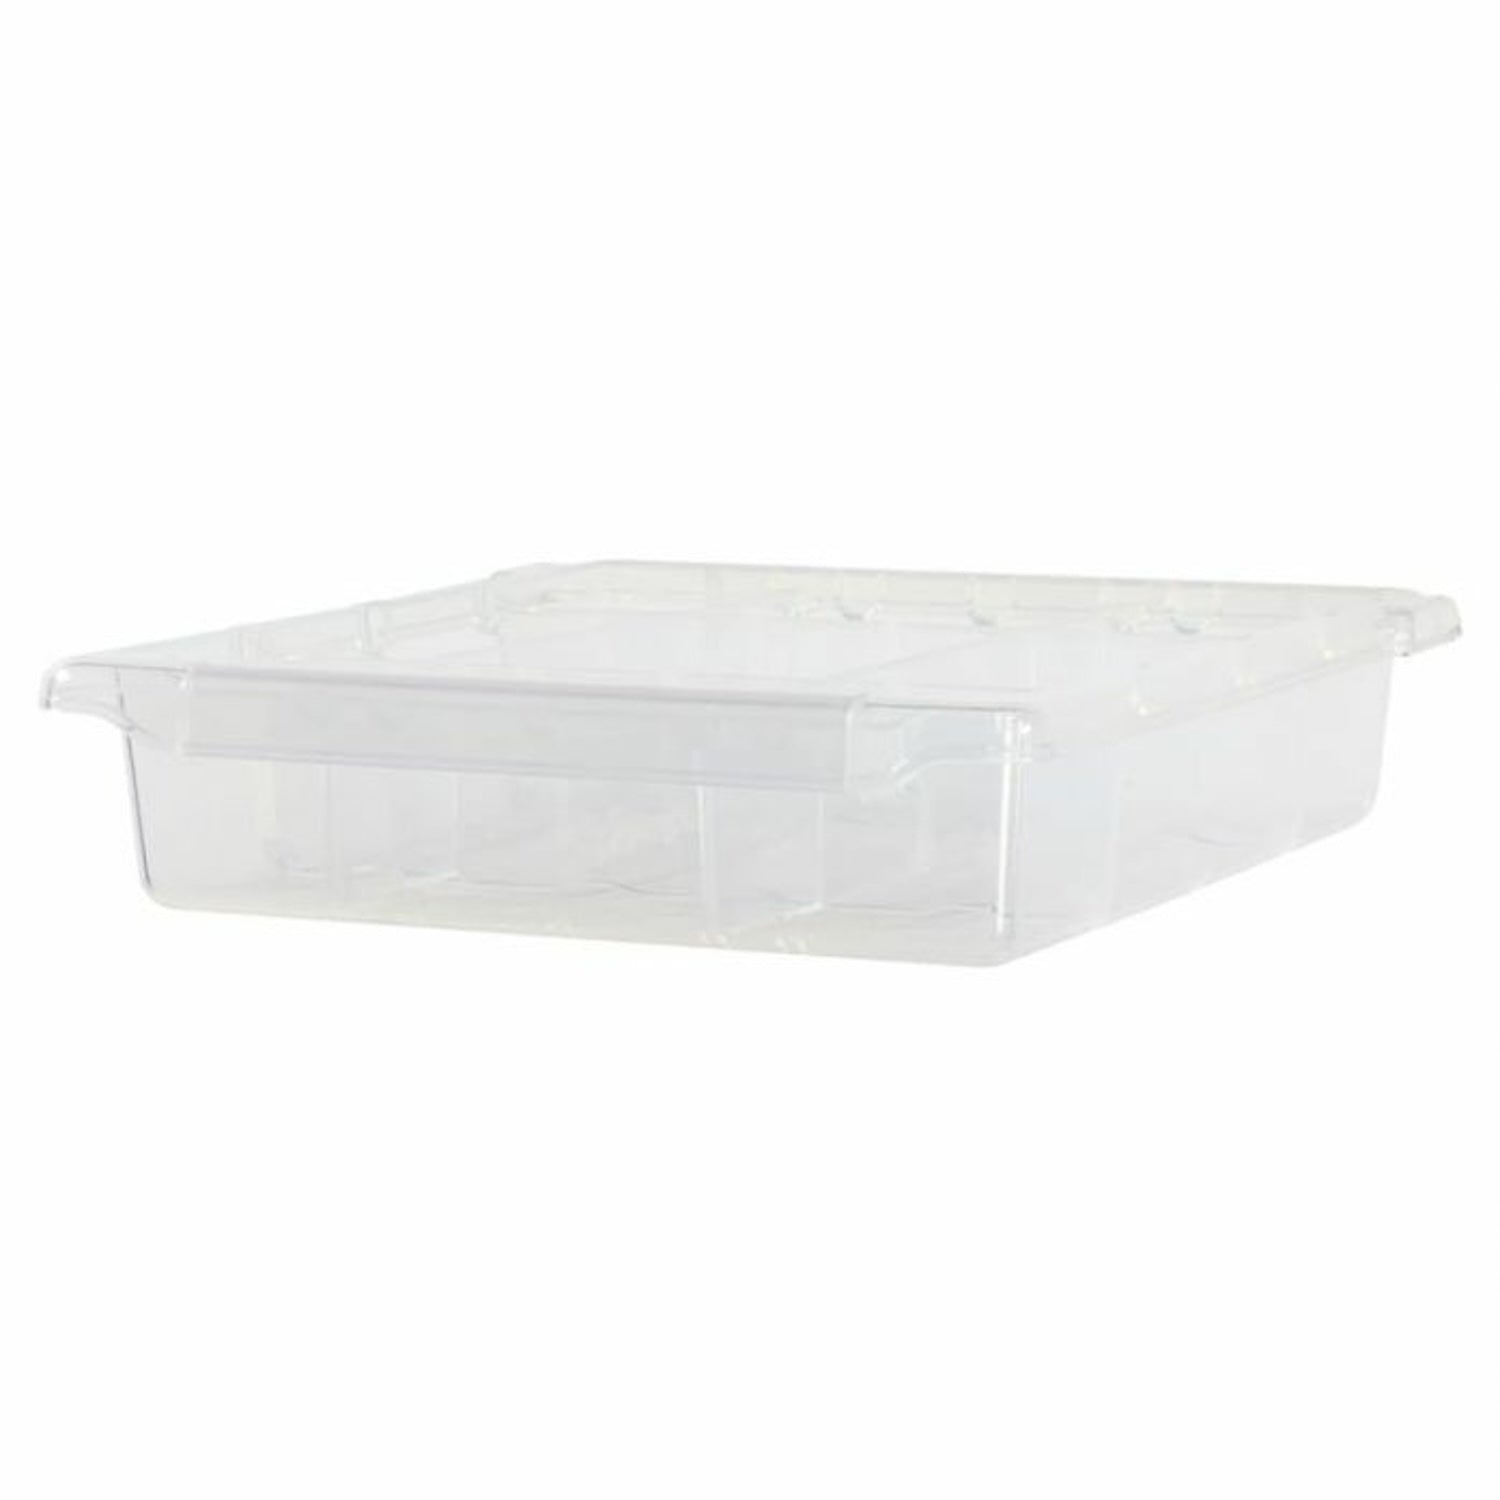 Caretray Shallow Tray | 100mm with Dividers